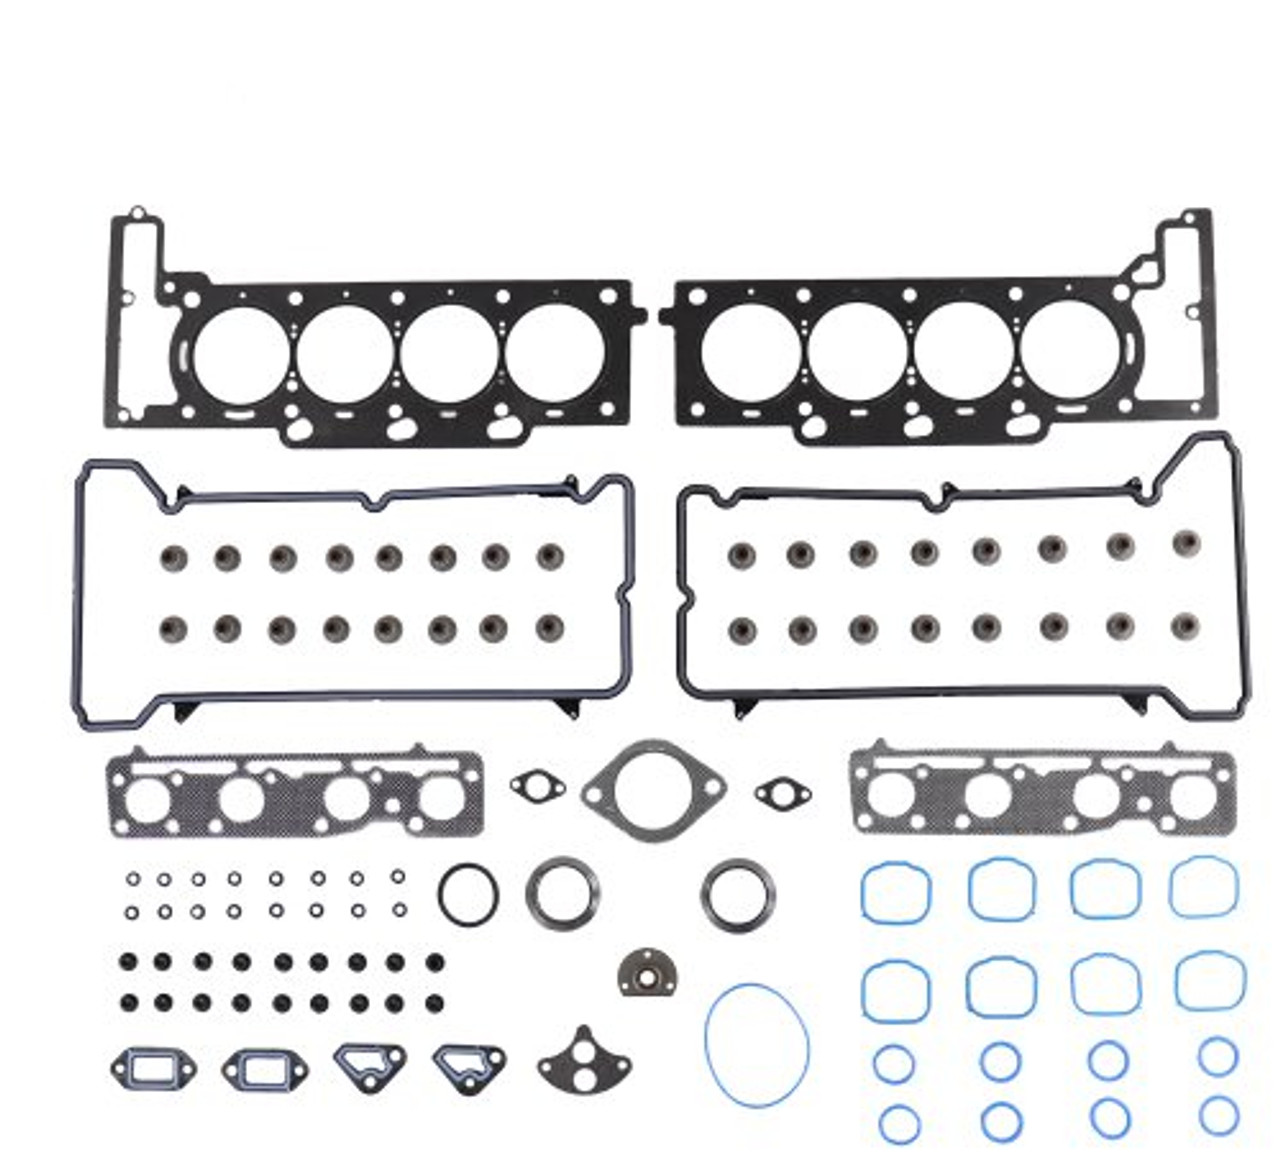 Head Gasket Set with Head Bolt Kit - 2010 Cadillac DTS 4.6L Engine Parts # HGB31641ZE13